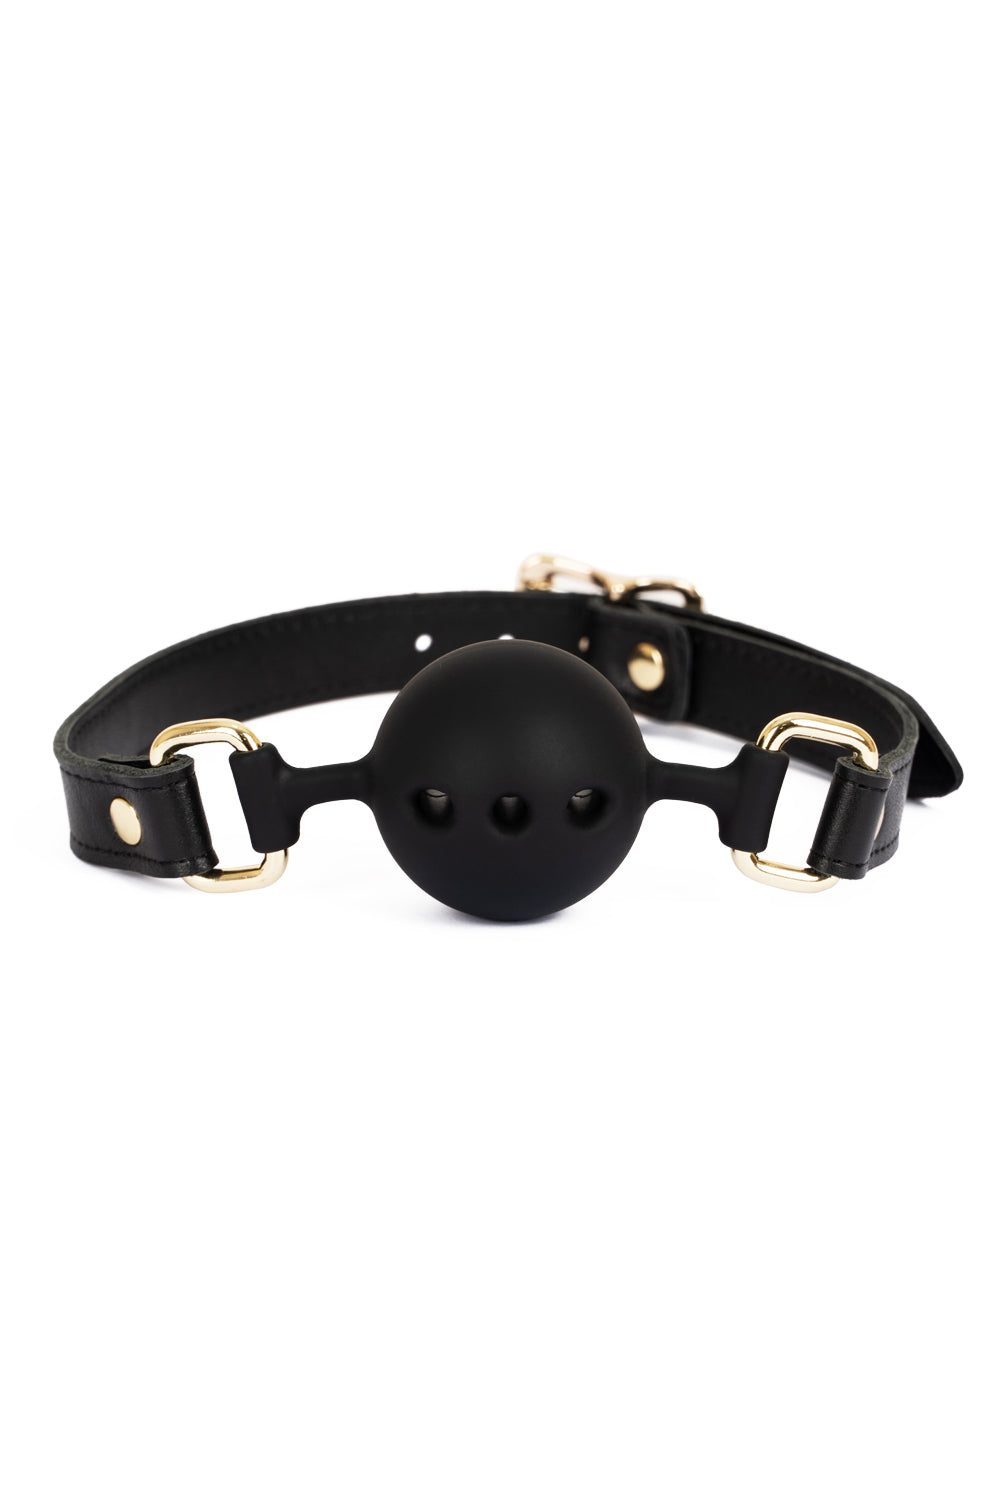 Soft Silicone Mouth Ball Gag. Brown